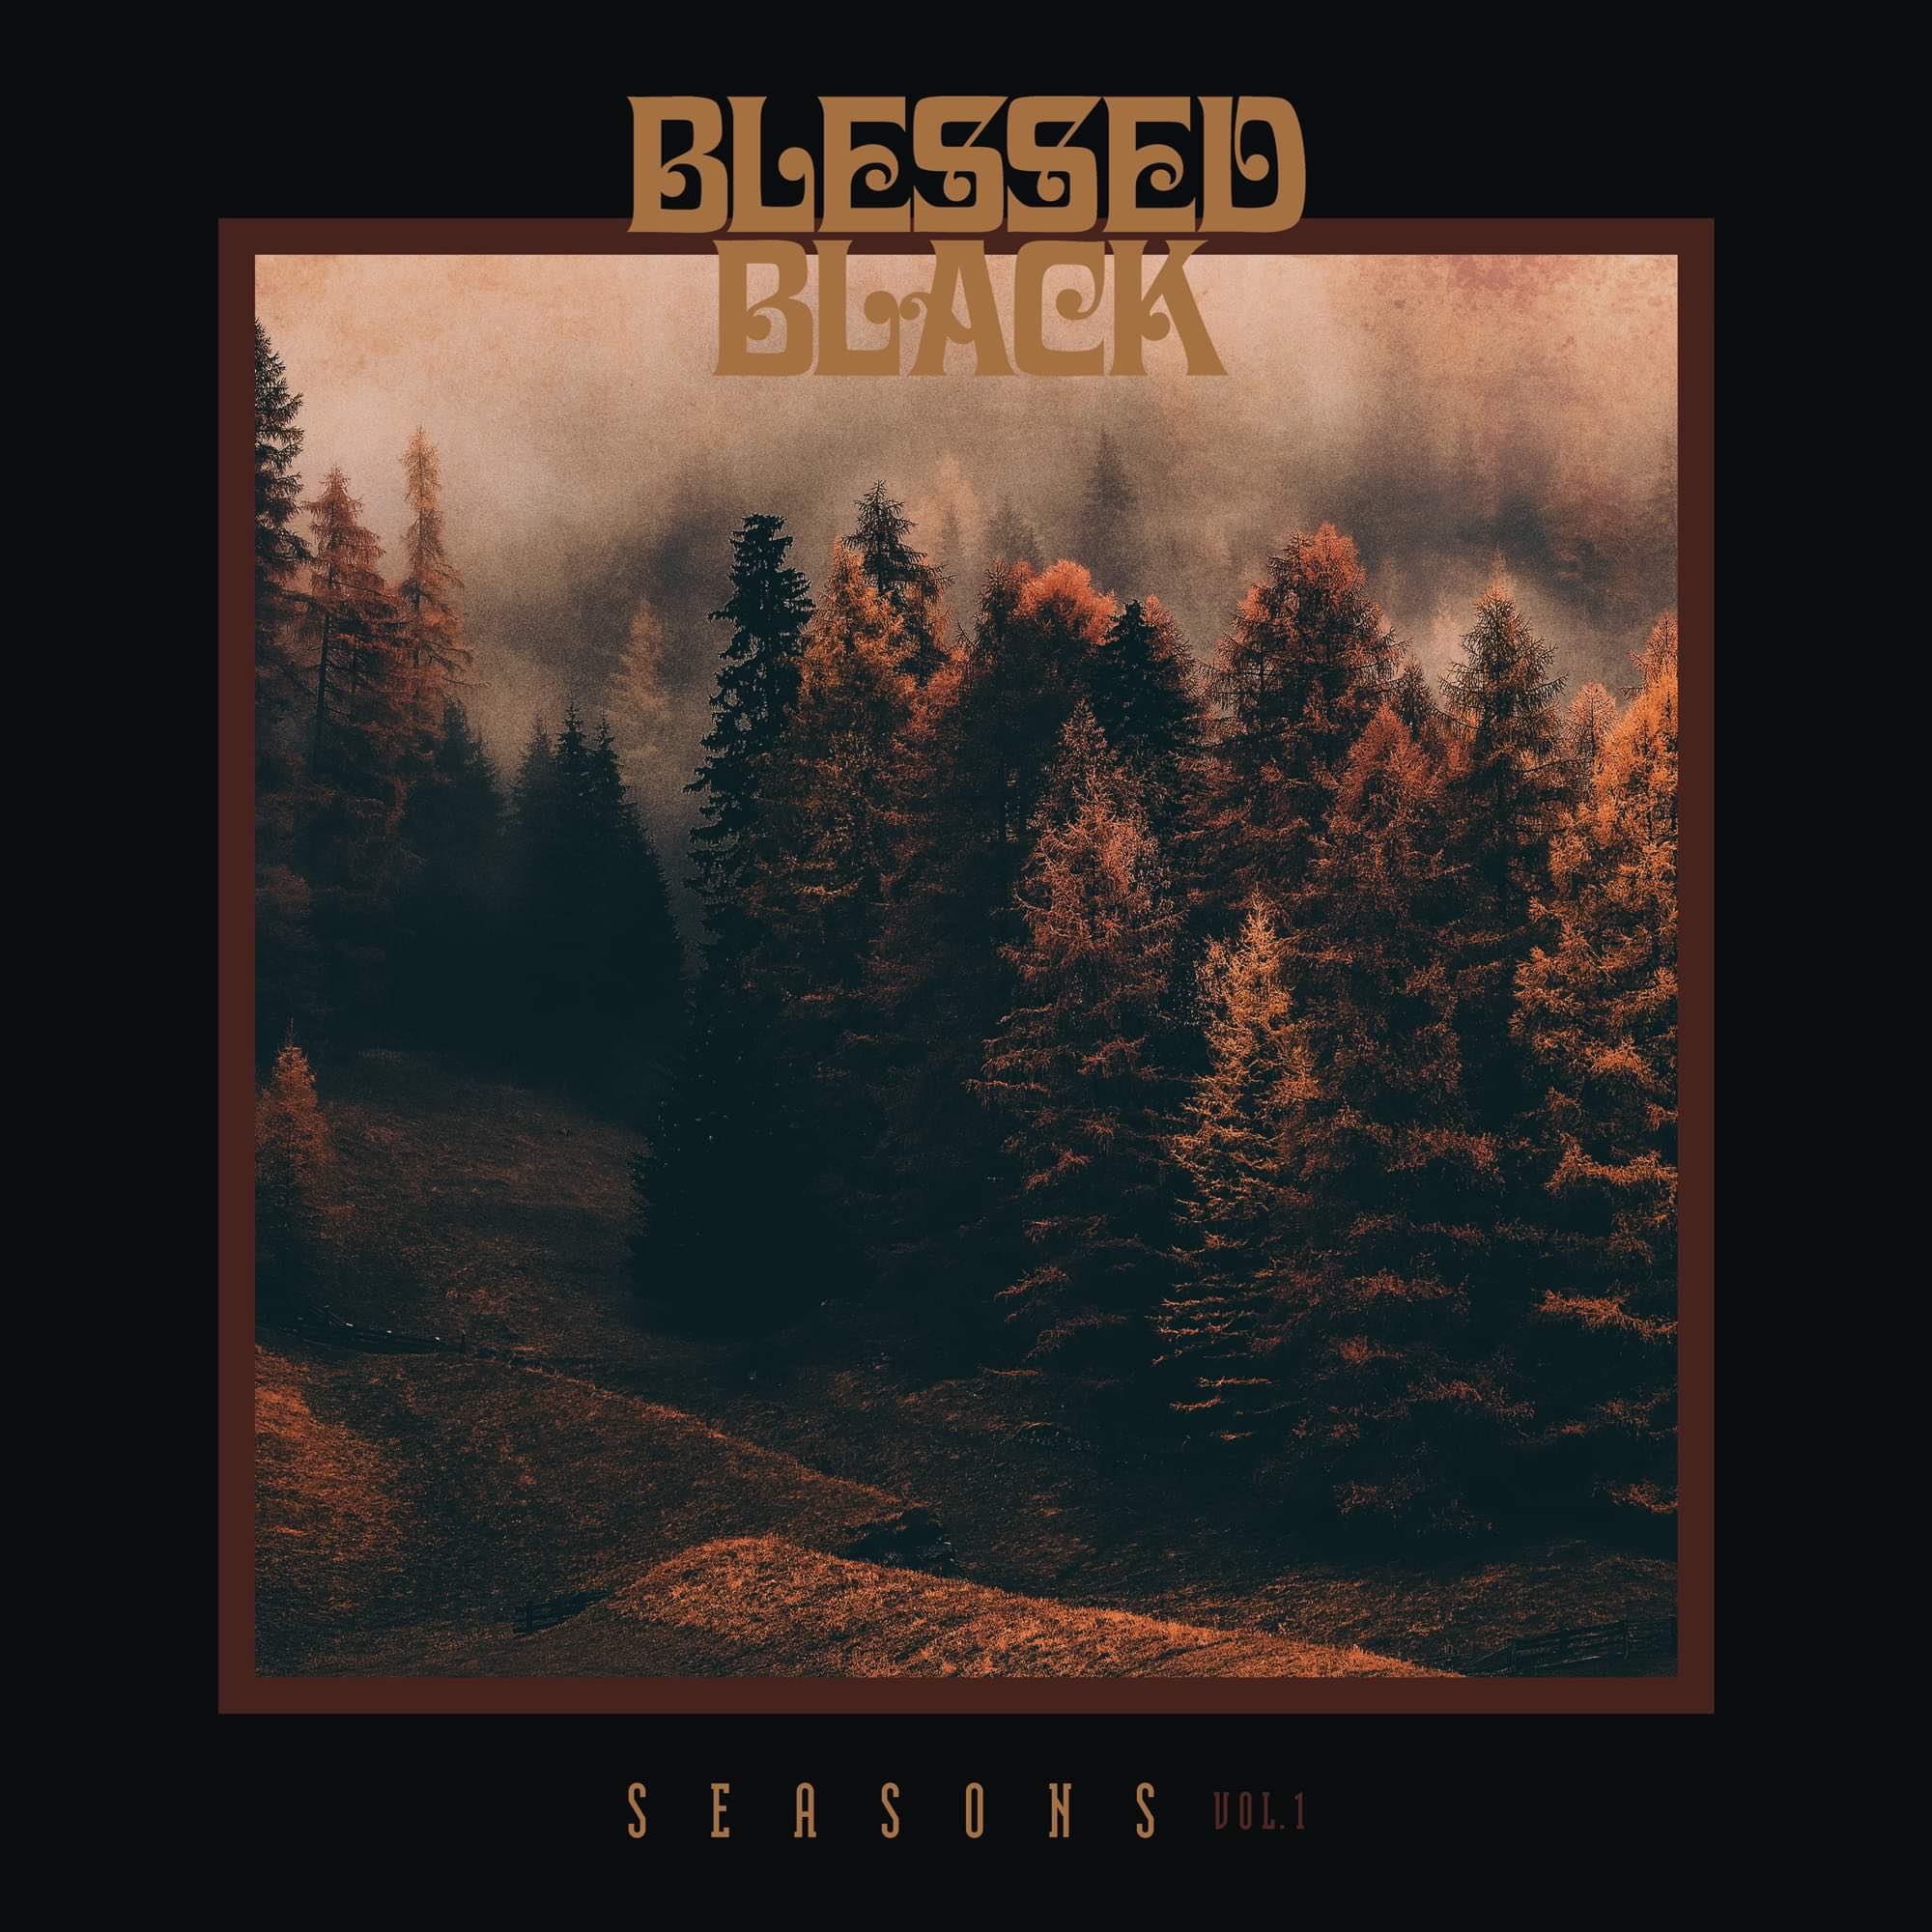 EP REVIEW: Seasons: Vol. 1 by Blessed Black